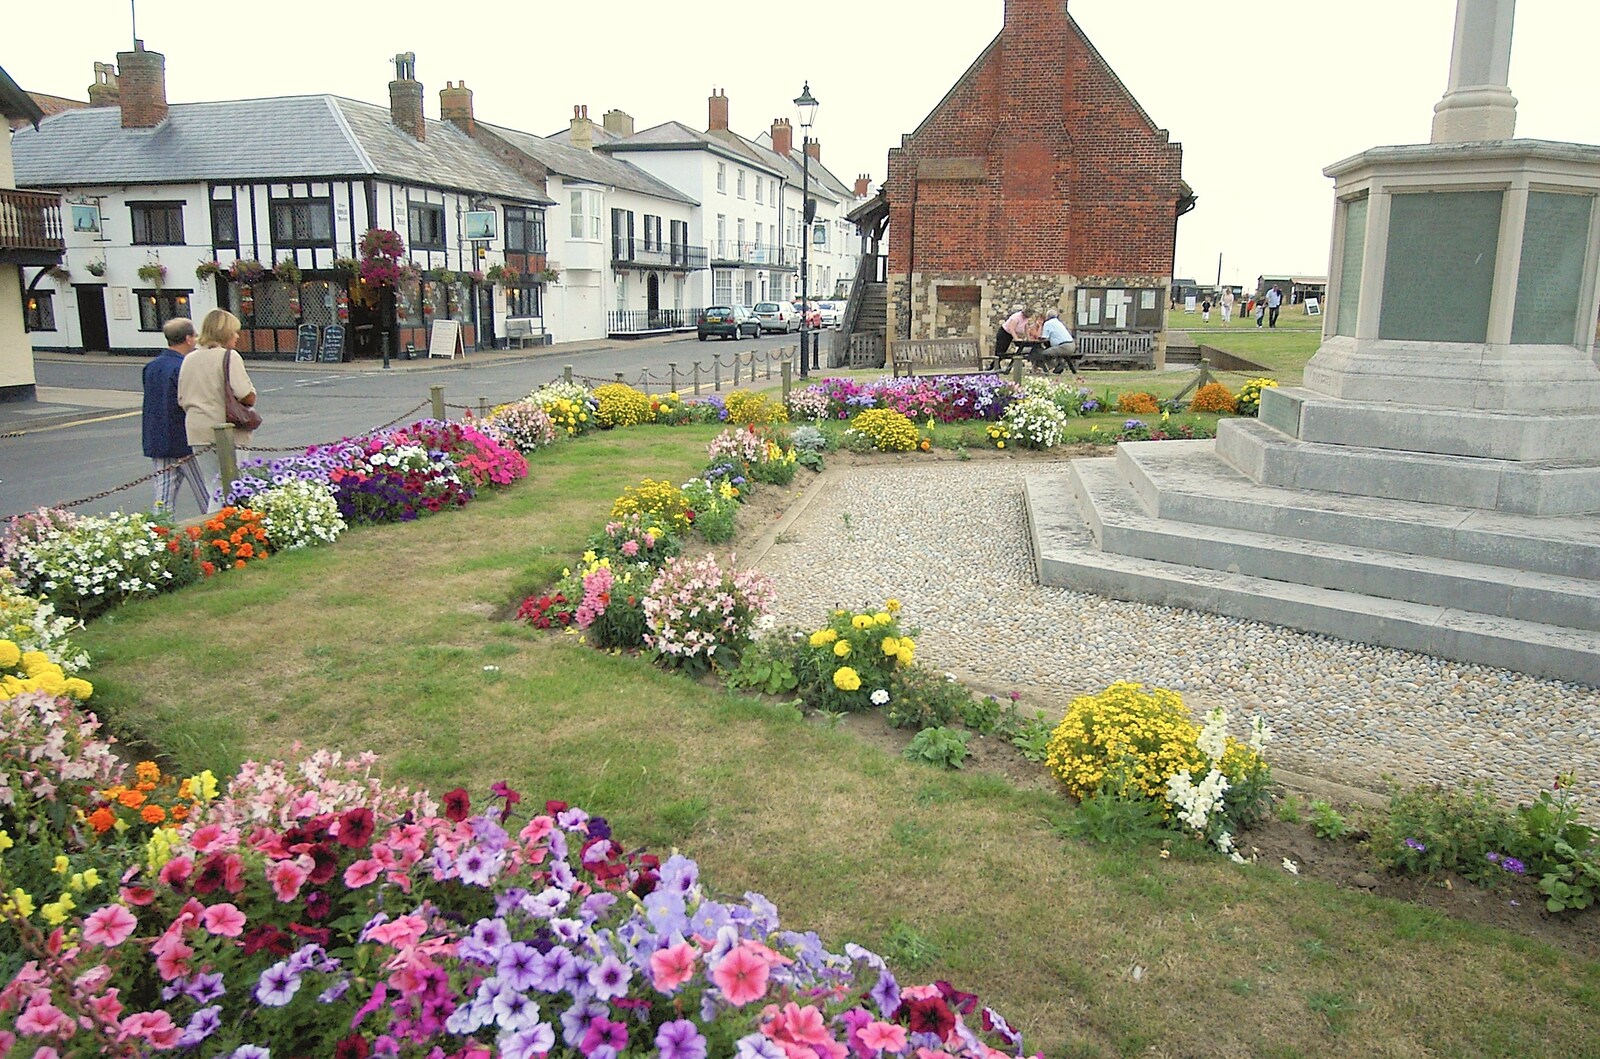 Flowerbeds near the Aldeburgh Moot Hall from The Regatta Restaurant with Mother and Mike, Aldeburgh, Suffolk - 10th August 2006